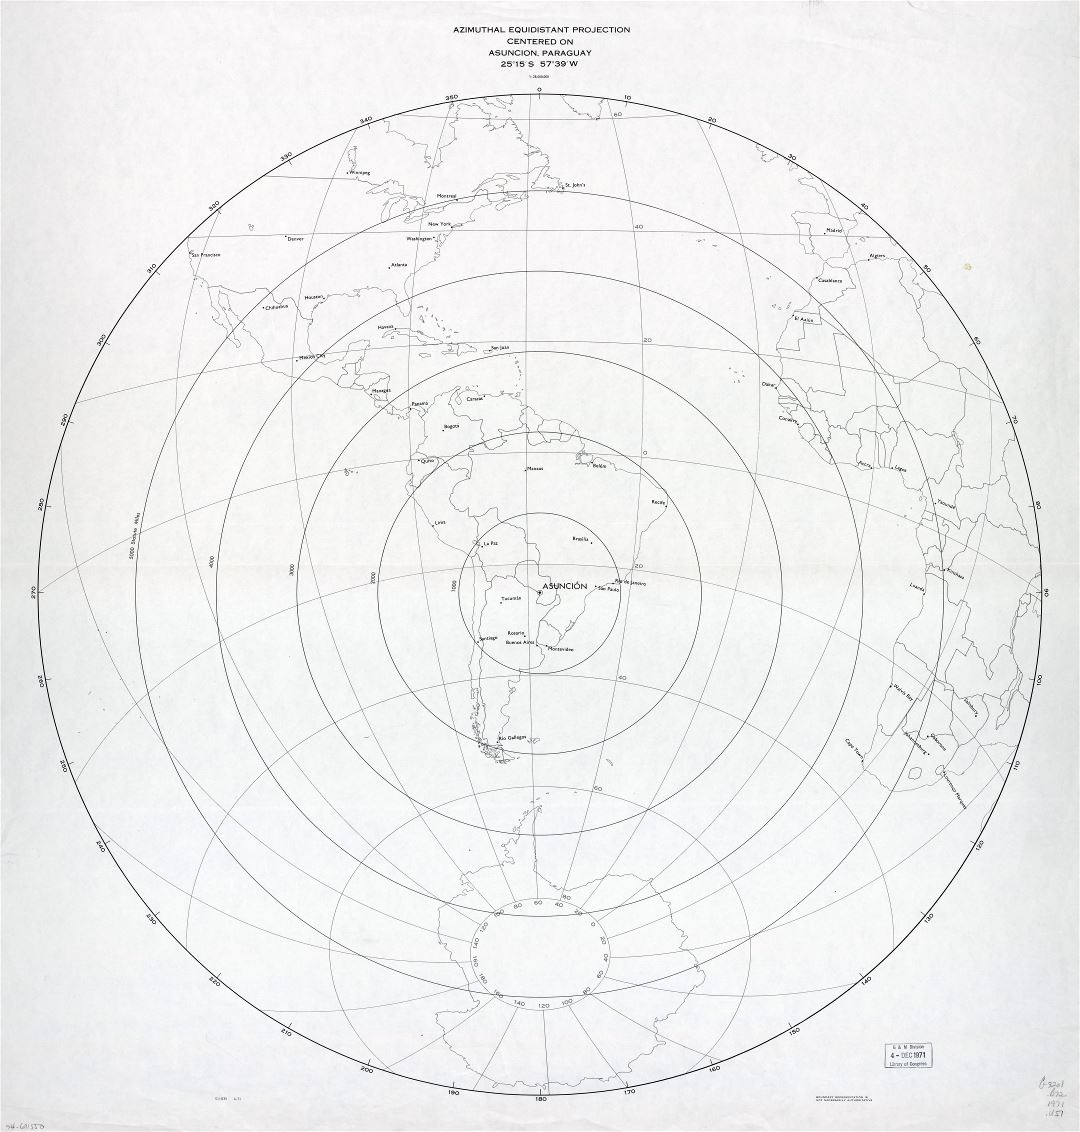 Large scale detailed azimuthal equidistant projection map - centered on Asuncion, Paraguay - 1971